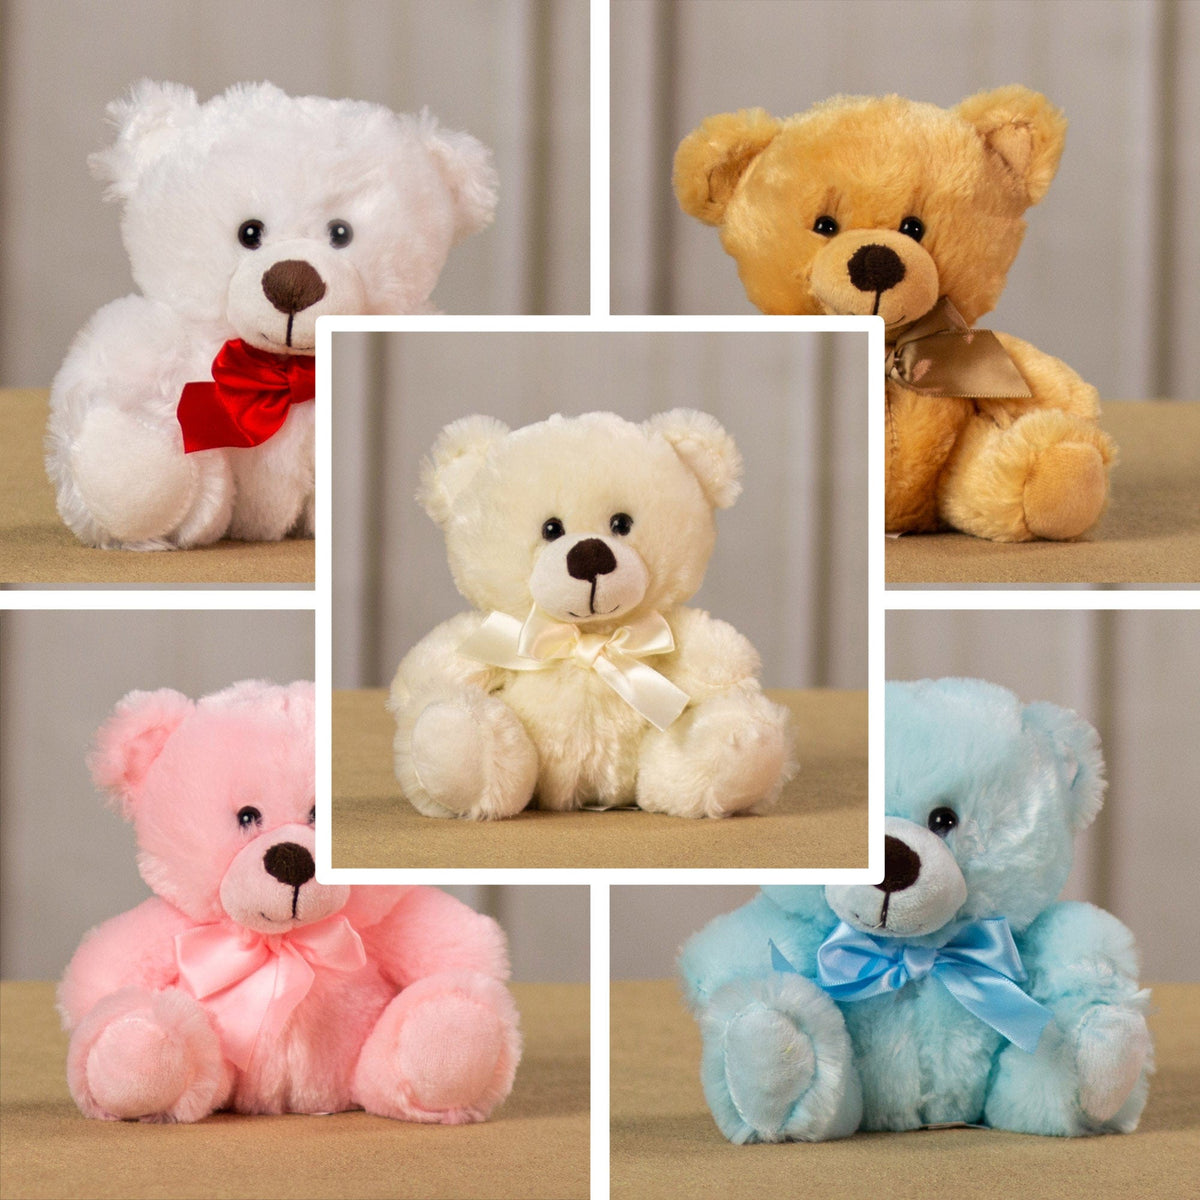 Plush 12 Pink Bear with Pink Bow (1 Set of 4)